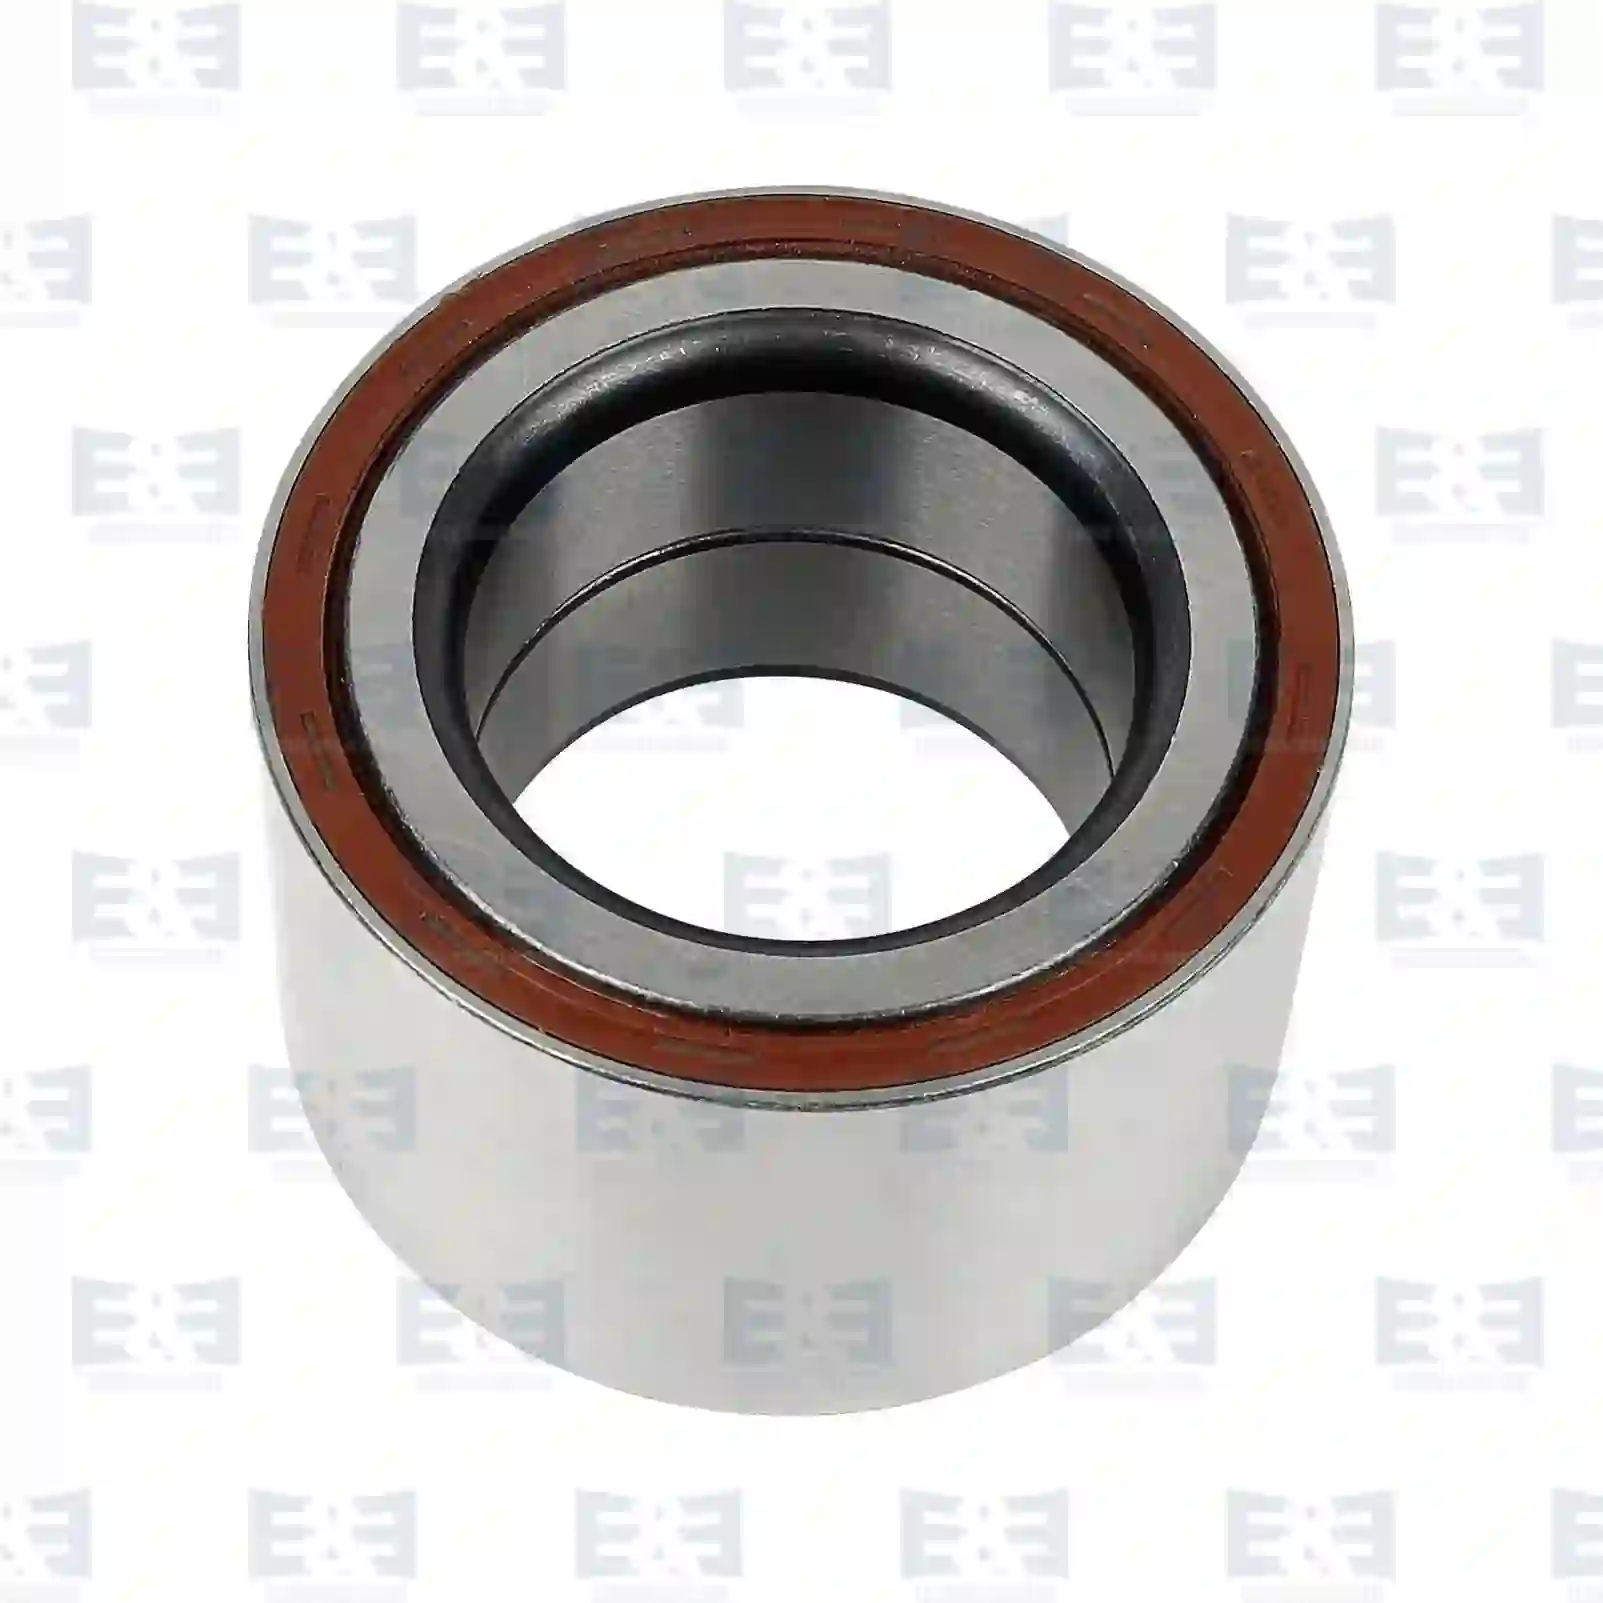 Tapered roller bearing, fan hub, 2E2202523, 1656462, ZG03036-0008, ||  2E2202523 E&E Truck Spare Parts | Truck Spare Parts, Auotomotive Spare Parts Tapered roller bearing, fan hub, 2E2202523, 1656462, ZG03036-0008, ||  2E2202523 E&E Truck Spare Parts | Truck Spare Parts, Auotomotive Spare Parts